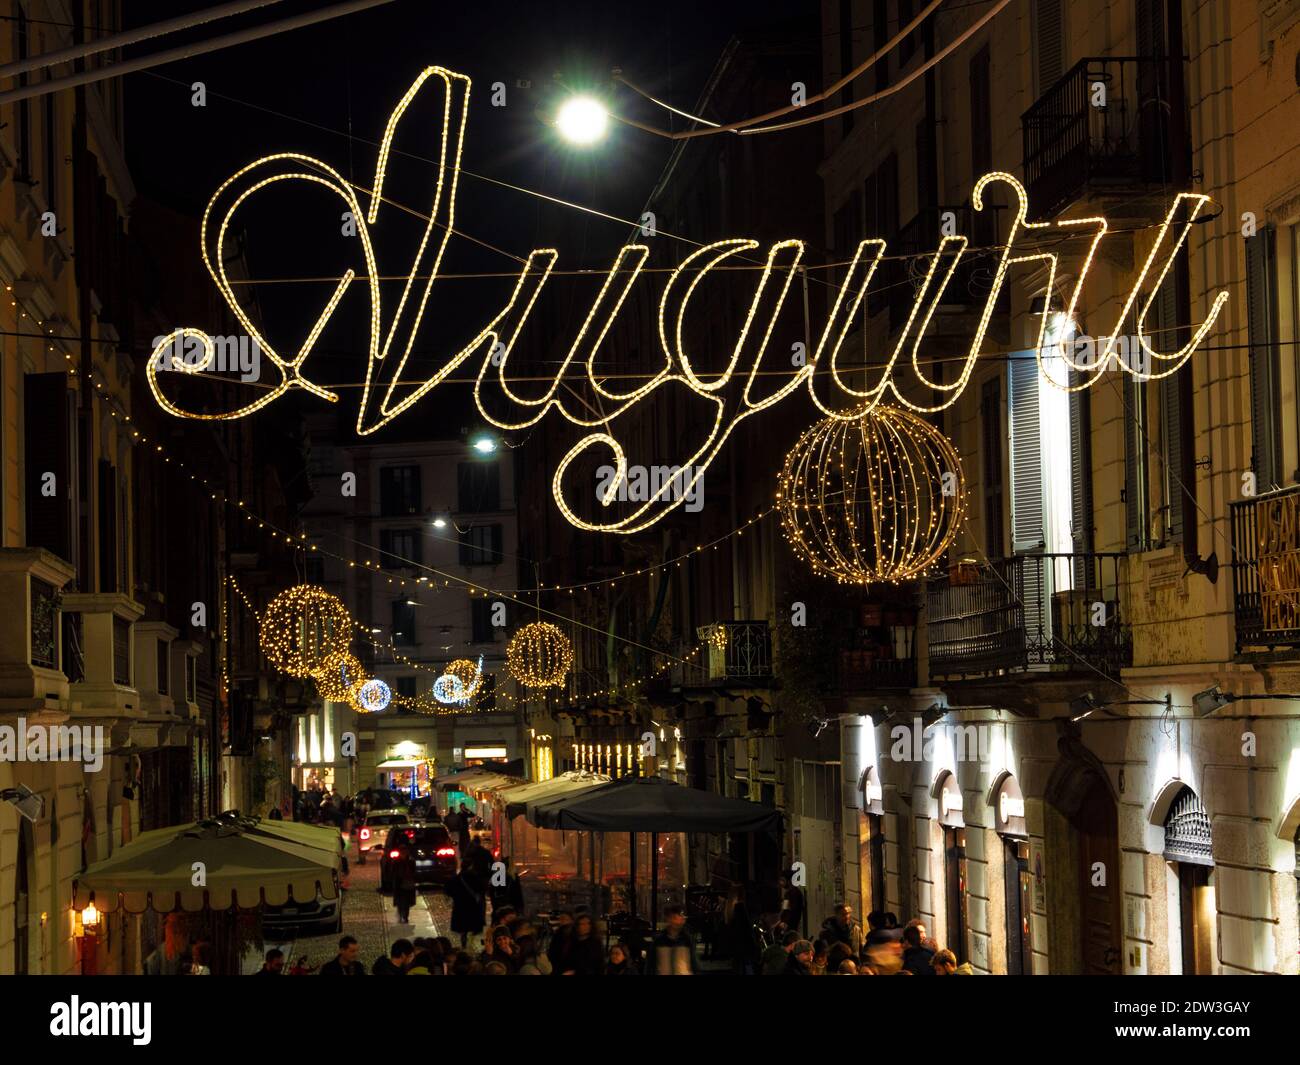 Greetings messages light up the streets of Milan during the Christmas holidays.Lombardy, Italy. Stock Photo